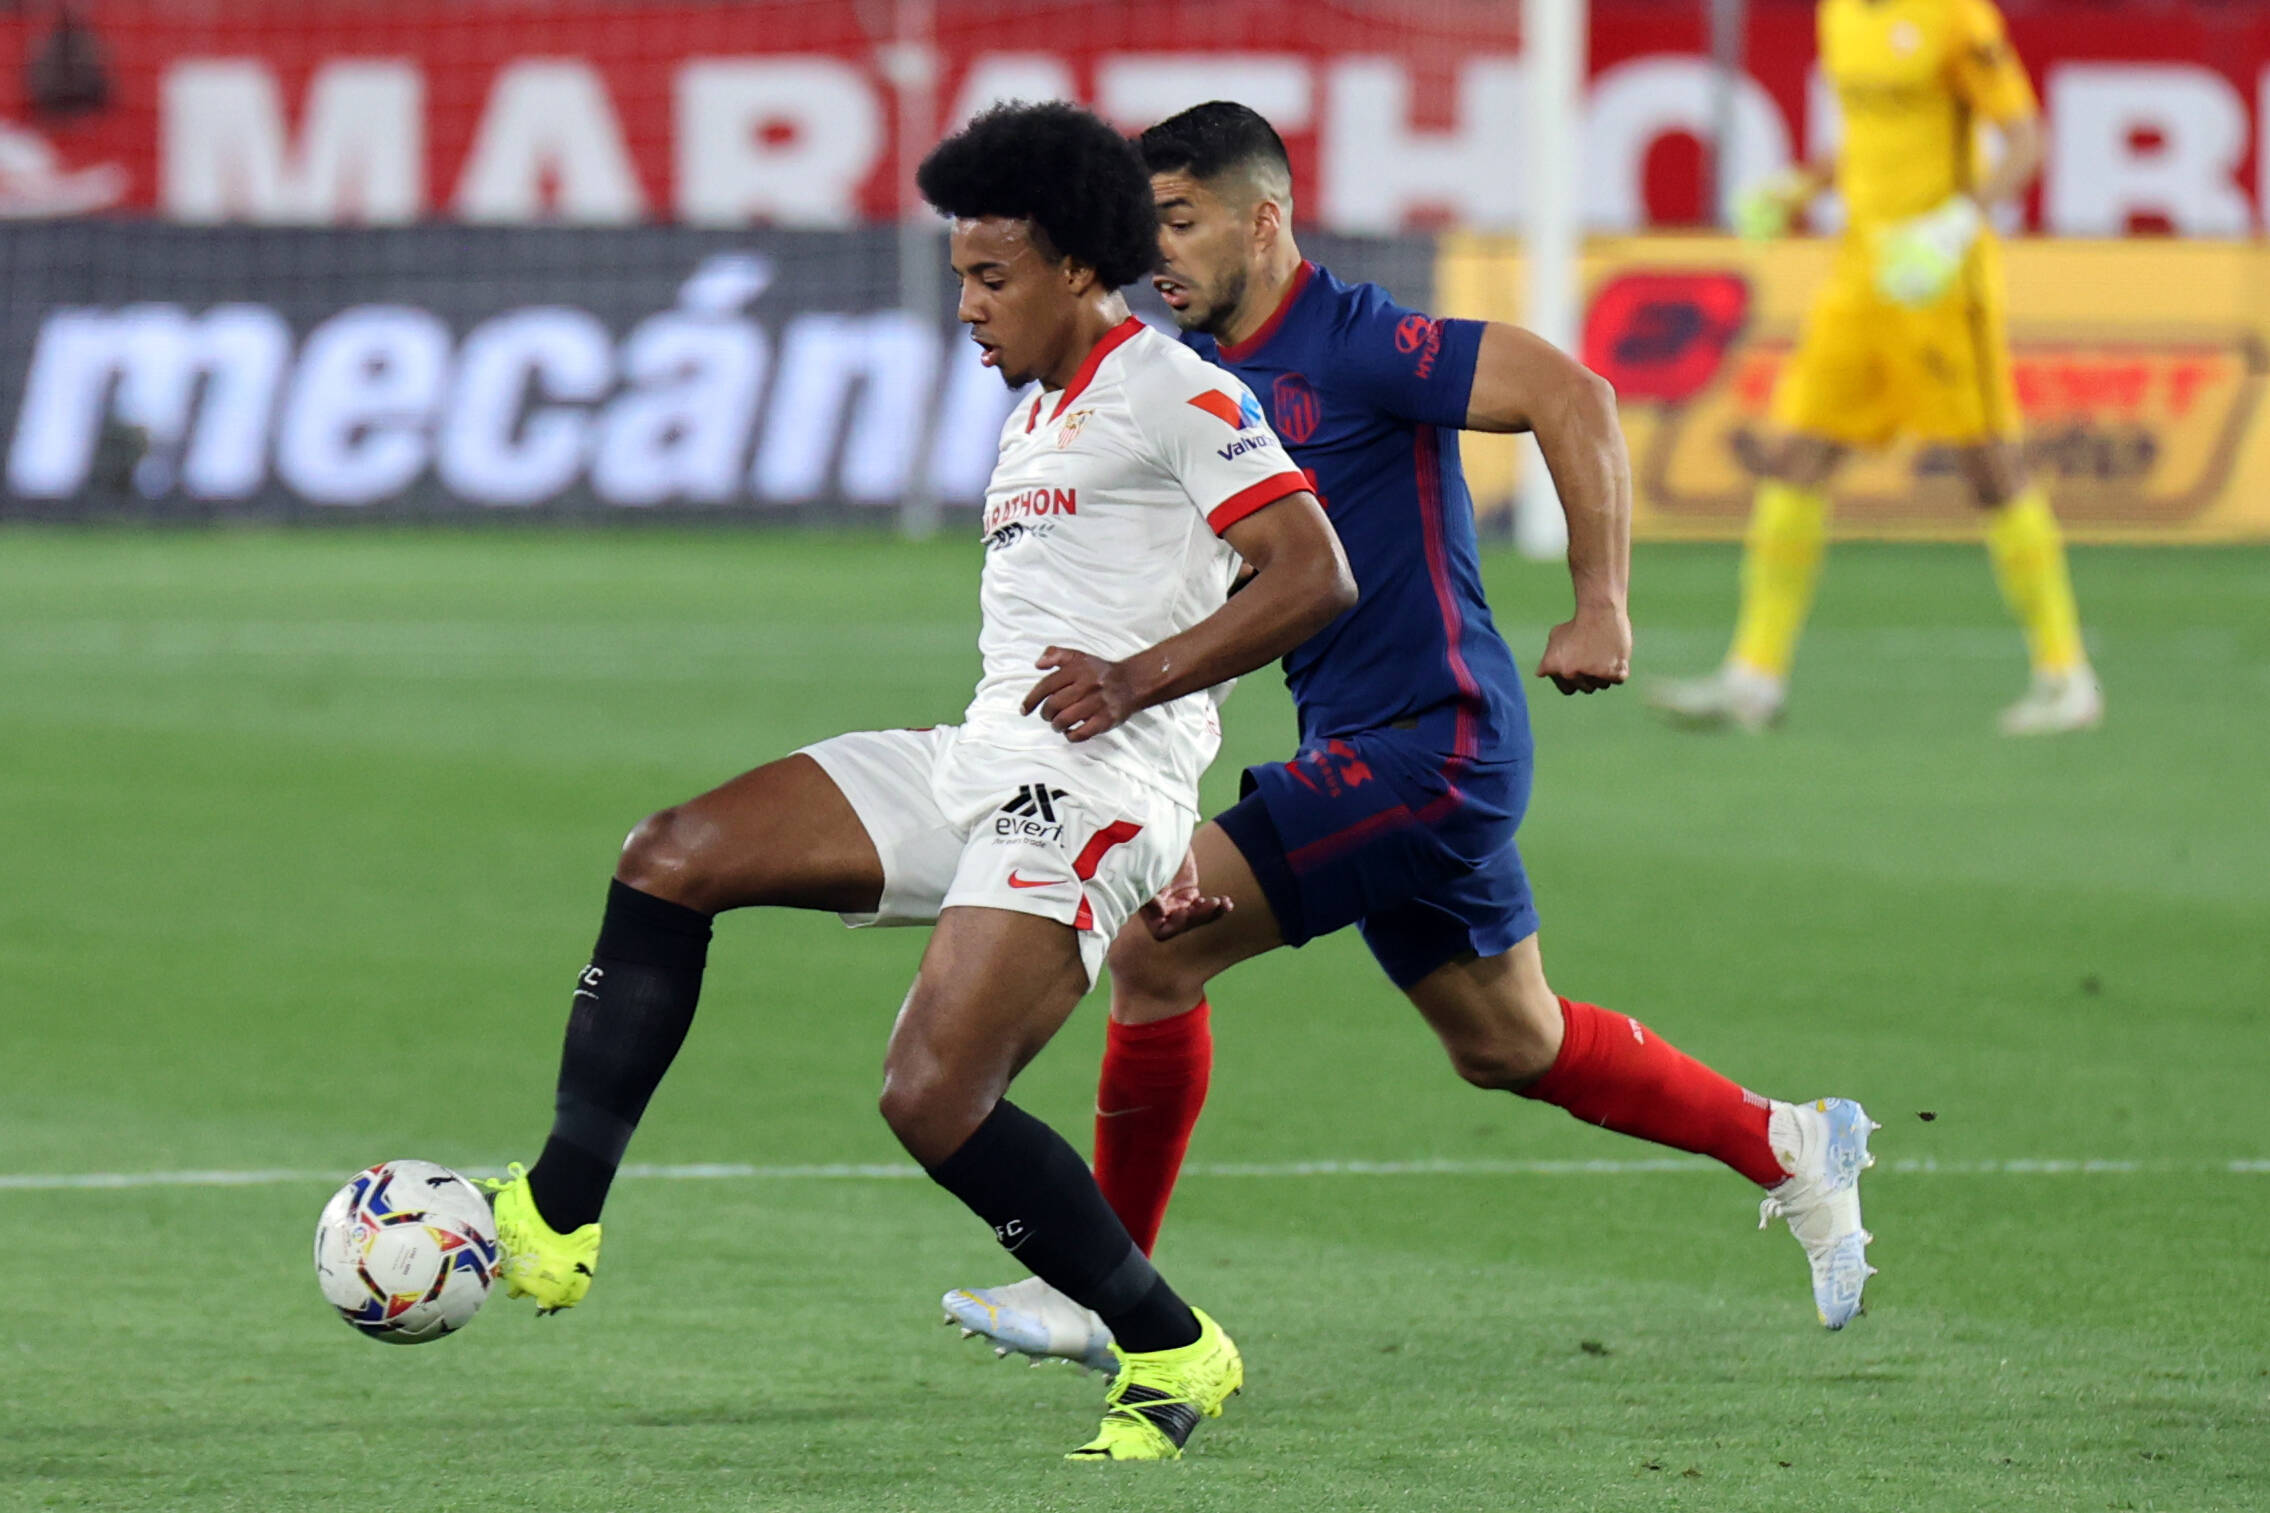 Price-tag of Chelsea target Jules Kounde to be influenced by Barcelona's interest.